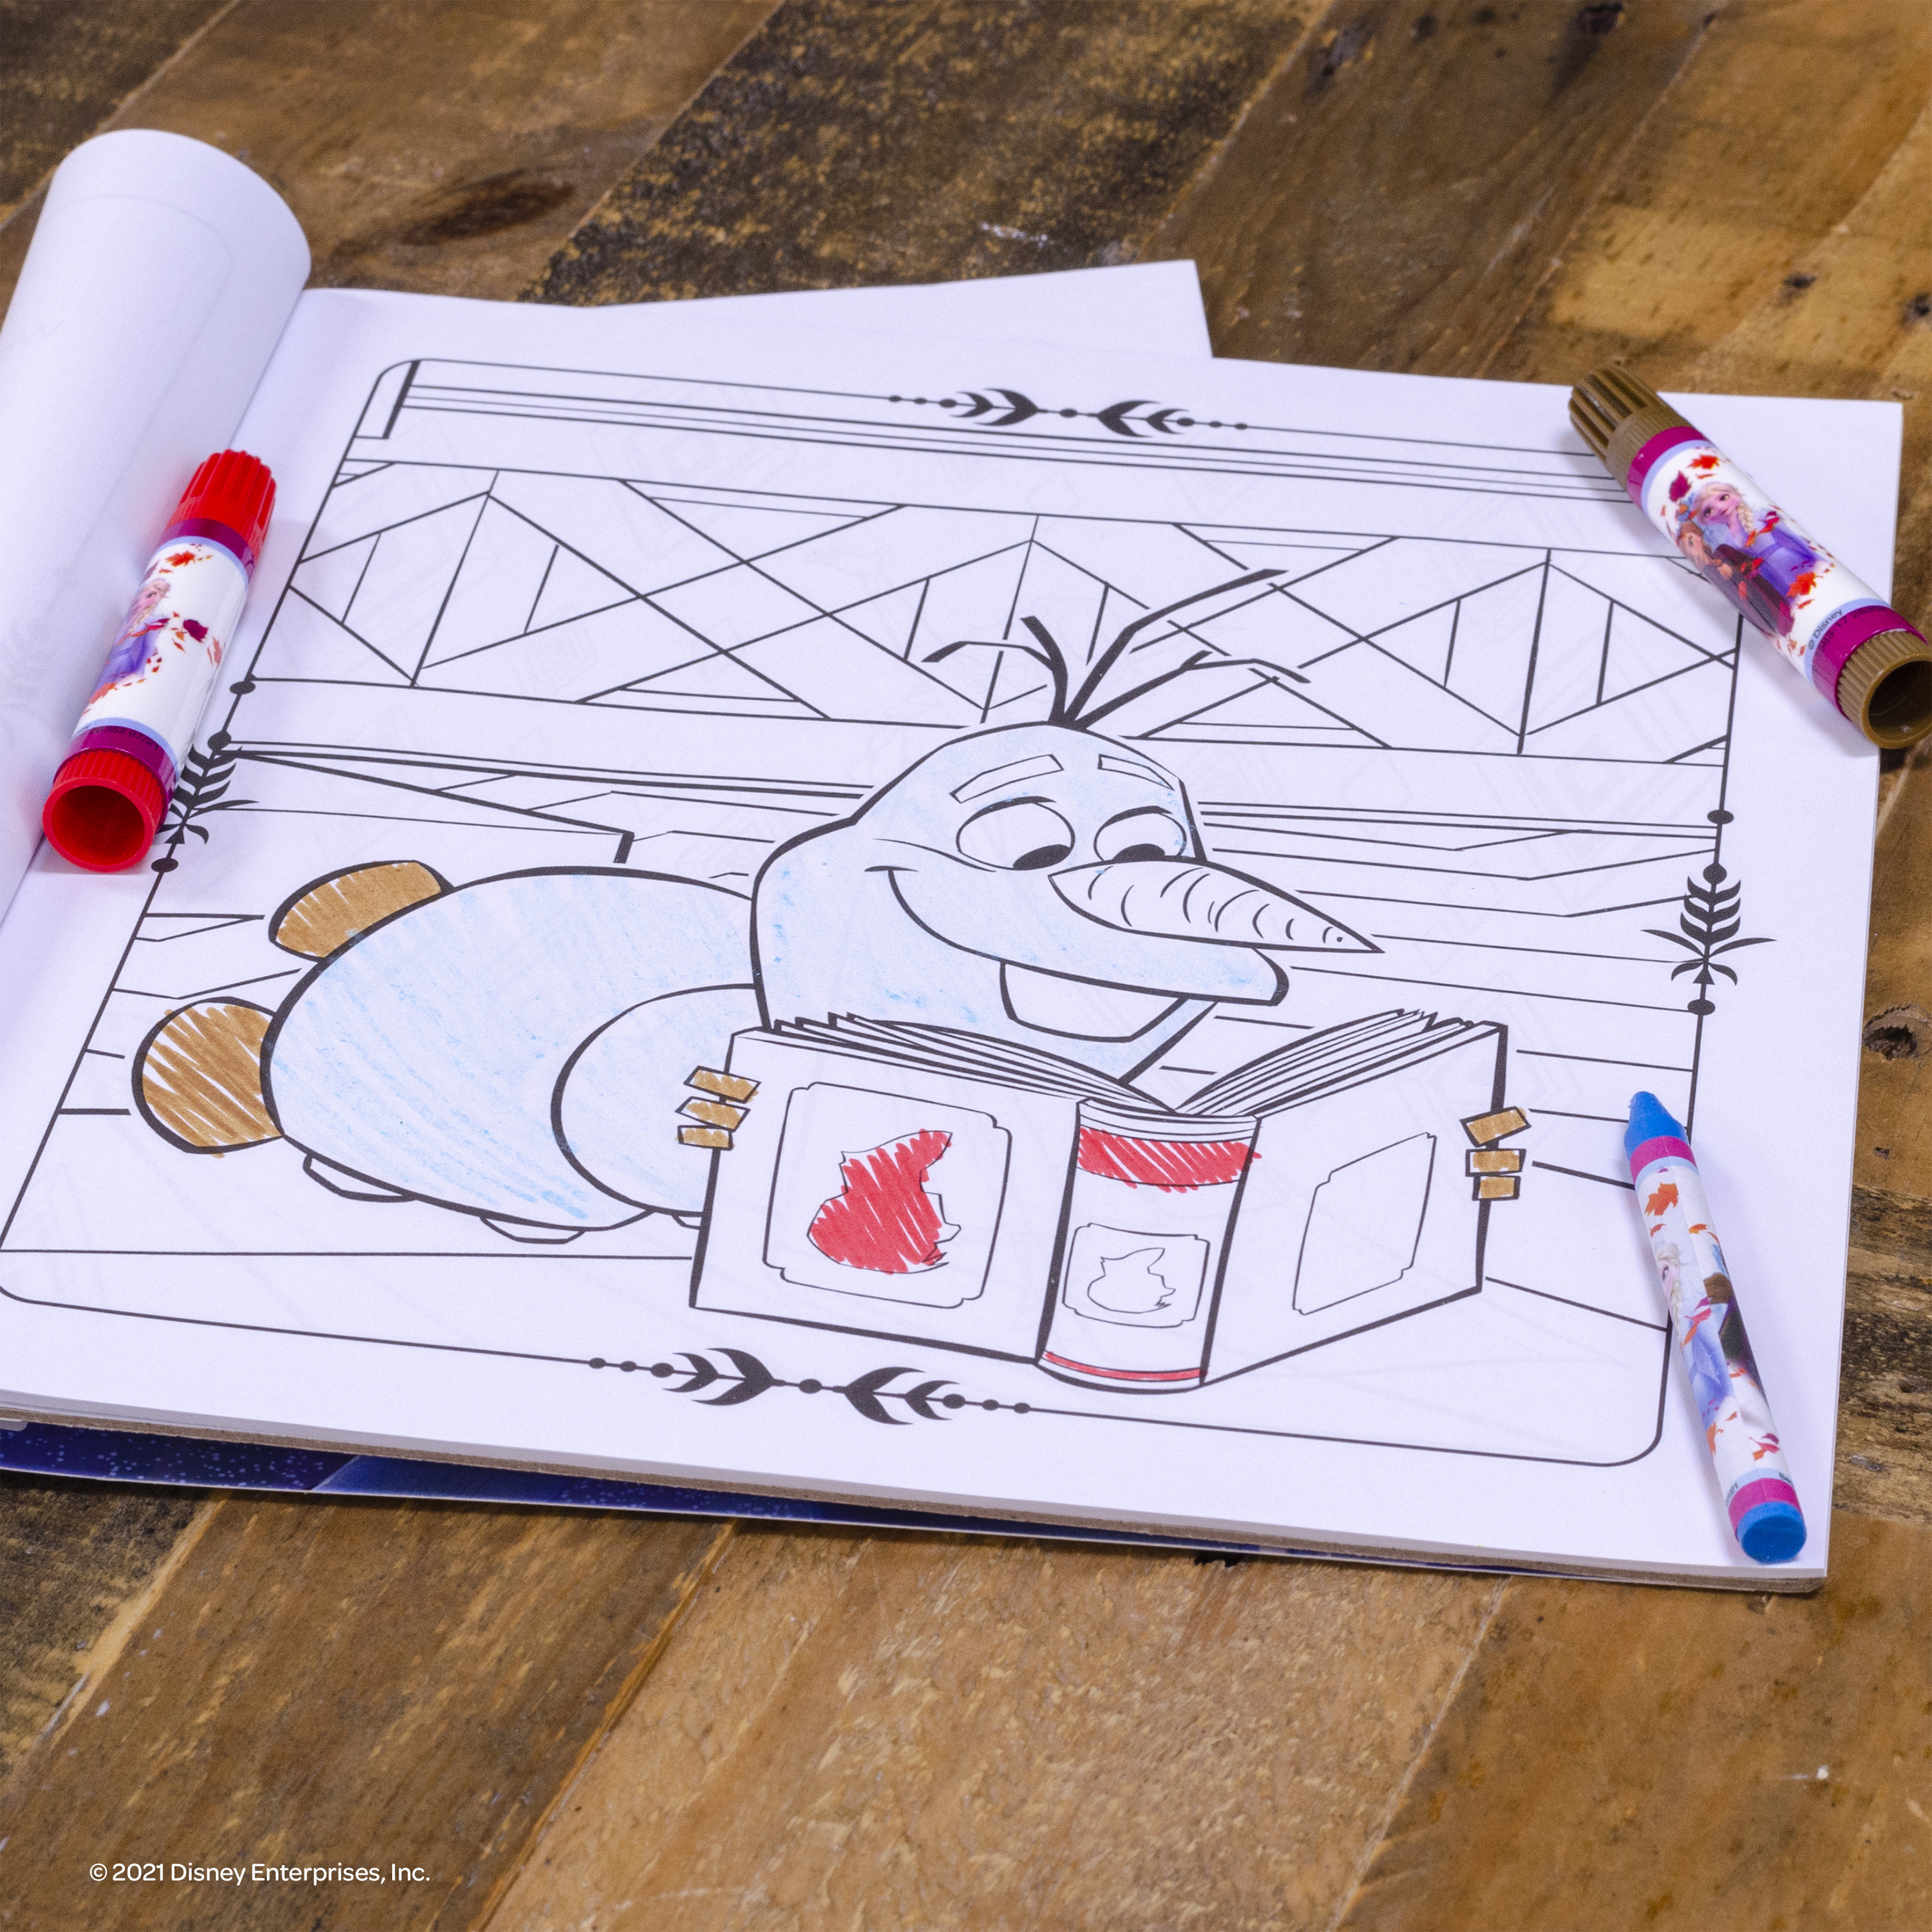 Disney Frozen World Of Art & Activity Kit with an Imagine Ink Book - image 5 of 8